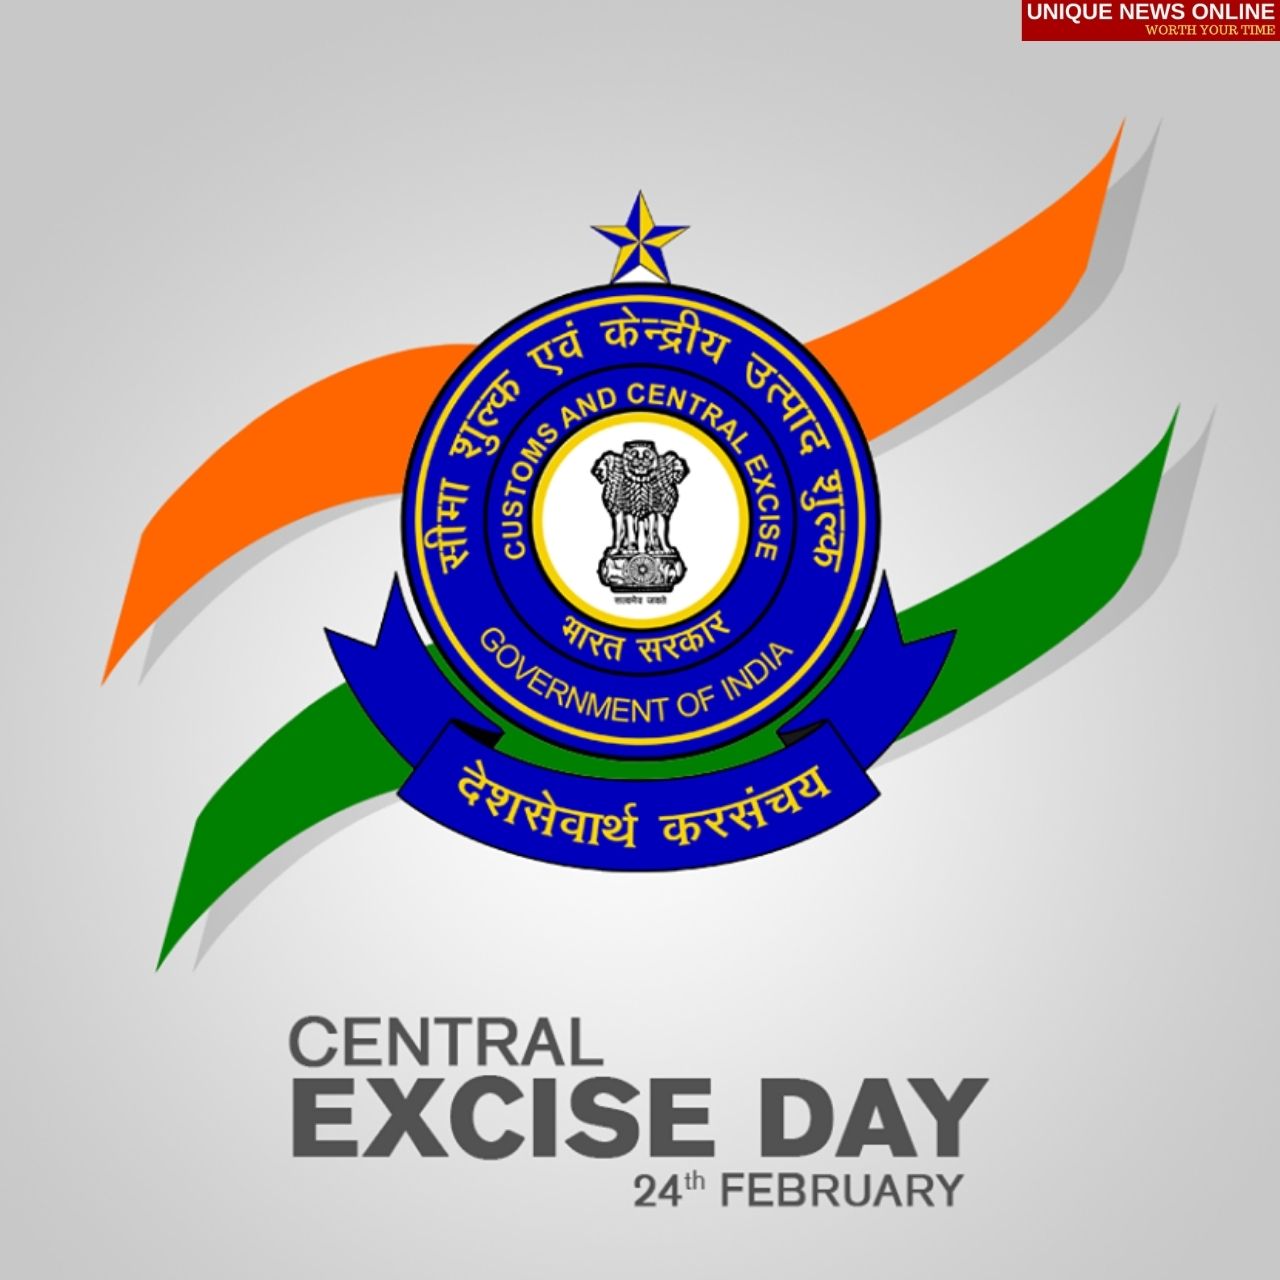 Central Excise Day 2022 Theme, Quotes, HD Images, Messages, Greetings, Wishes to honor the Central Board of Indirect Taxes and Customs